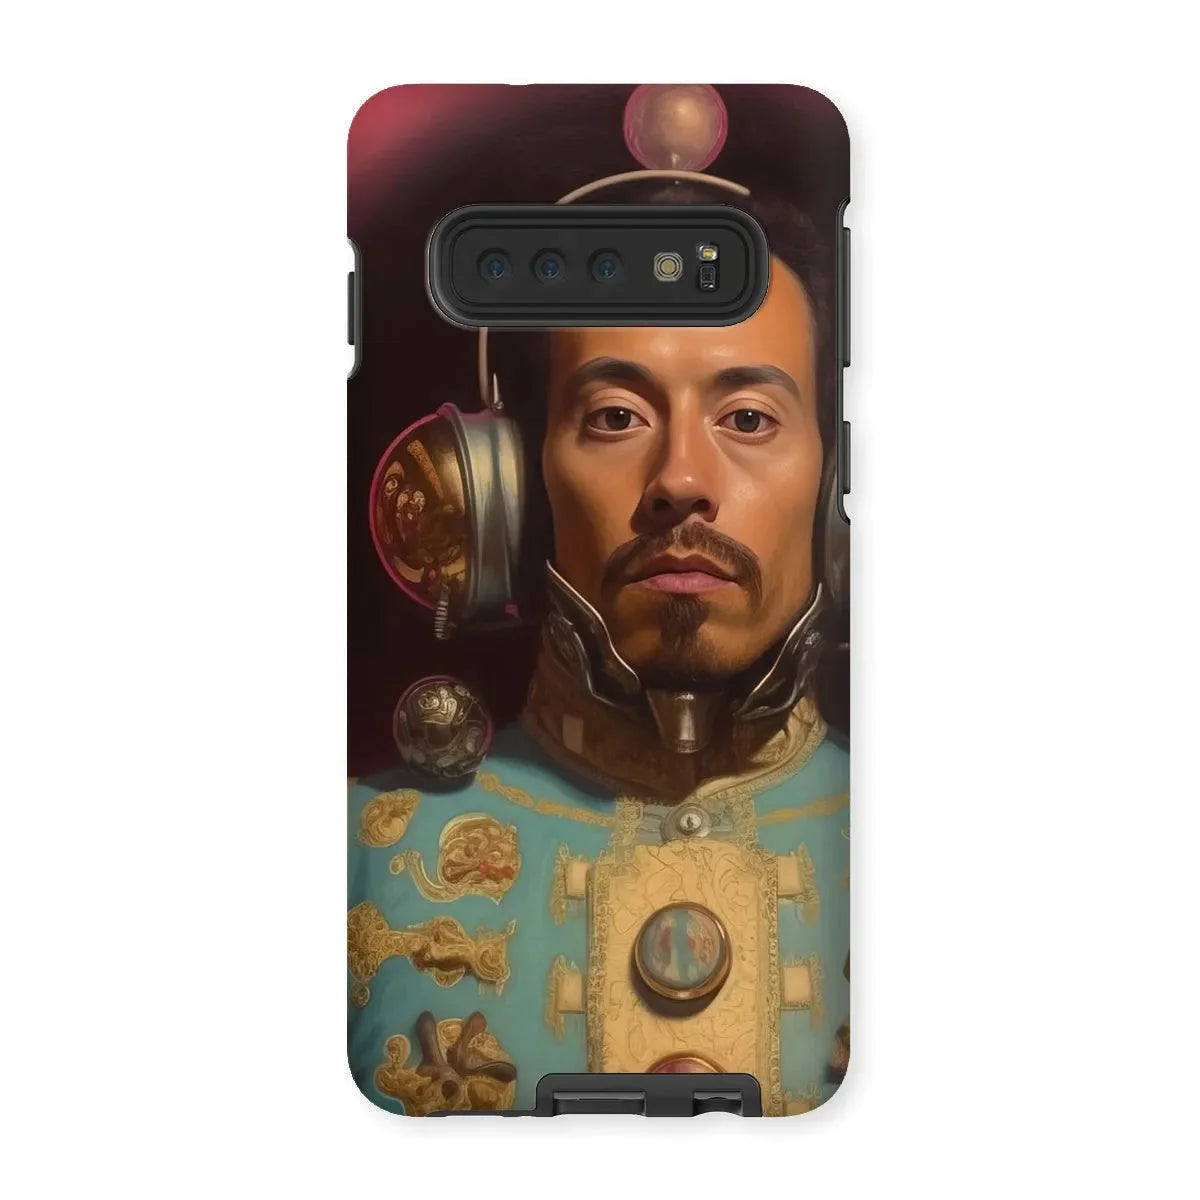 Armando The Gay Astronaut - Queercore Aesthetic Phone Case - Samsung Galaxy S10 / Matte - Mobile Phone Cases